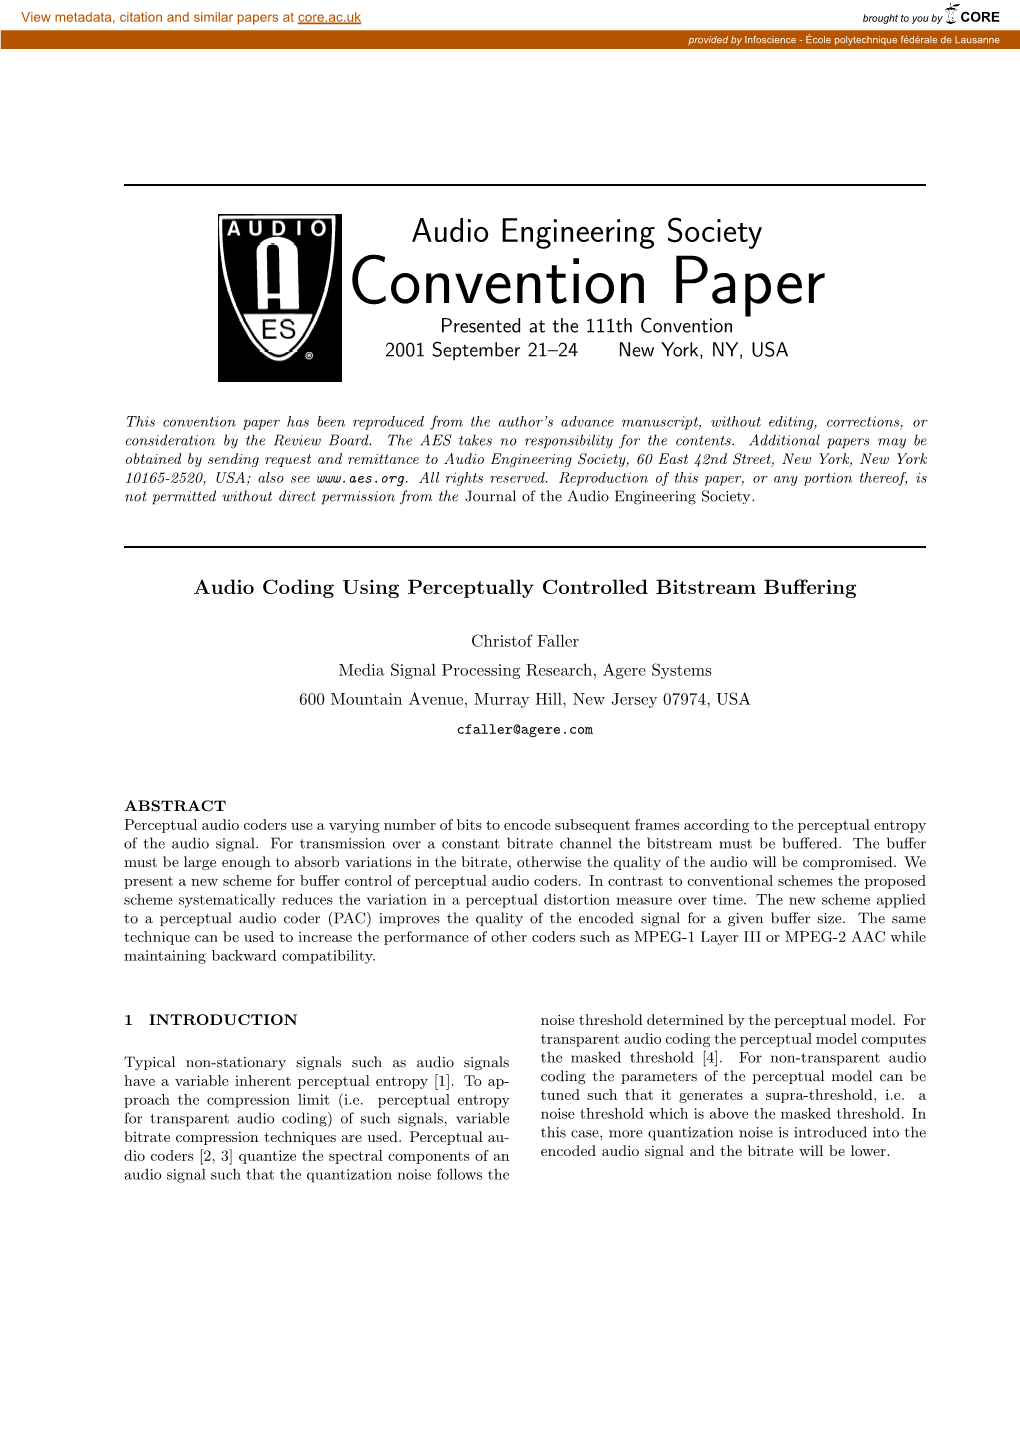 Convention Paper Presented at the 111Th Convention 2001 September 21–24 New York, NY, USA